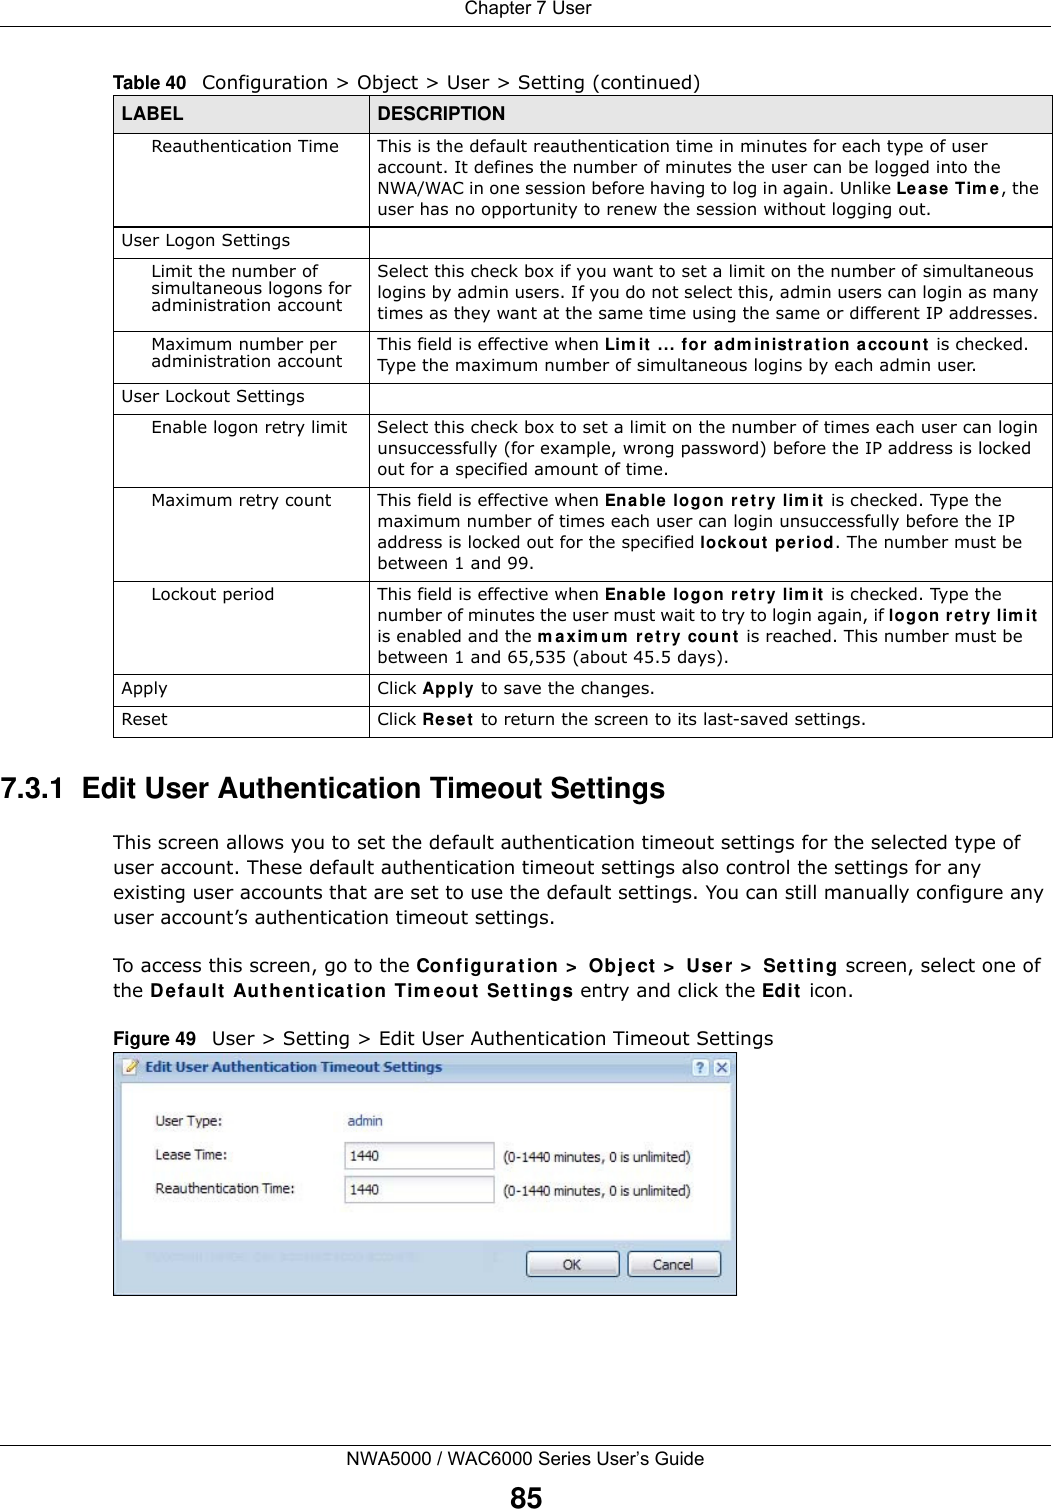  Chapter 7 UserNWA5000 / WAC6000 Series User’s Guide857.3.1  Edit User Authentication Timeout SettingsThis screen allows you to set the default authentication timeout settings for the selected type of user account. These default authentication timeout settings also control the settings for any existing user accounts that are set to use the default settings. You can still manually configure any user account’s authentication timeout settings.To access this screen, go to the Configur at ion &gt;  Obj ect  &gt;  User &gt;  Sett ing screen, select one of the De fault  Authe nt ica tion Tim eout  Se t tings entry and click the Edit icon.Figure 49   User &gt; Setting &gt; Edit User Authentication Timeout SettingsReauthentication Time This is the default reauthentication time in minutes for each type of user account. It defines the number of minutes the user can be logged into the NWA/WAC in one session before having to log in again. Unlike Le a se  Tim e, the user has no opportunity to renew the session without logging out.User Logon SettingsLimit the number of simultaneous logons for administration accountSelect this check box if you want to set a limit on the number of simultaneous logins by admin users. If you do not select this, admin users can login as many times as they want at the same time using the same or different IP addresses.Maximum number per administration account This field is effective when Lim it  ... for  adm inist rat ion accoun t  is checked. Type the maximum number of simultaneous logins by each admin user. User Lockout SettingsEnable logon retry limit Select this check box to set a limit on the number of times each user can login unsuccessfully (for example, wrong password) before the IP address is locked out for a specified amount of time.Maximum retry count This field is effective when Ena ble  logon ret r y lim it is checked. Type the maximum number of times each user can login unsuccessfully before the IP address is locked out for the specified lock ou t  period. The number must be between 1 and 99.Lockout period This field is effective when Enable logon  retry lim it  is checked. Type the number of minutes the user must wait to try to login again, if logon  retry lim it  is enabled and the m a xim um  retry cou n t  is reached. This number must be between 1 and 65,535 (about 45.5 days).Apply Click Apply to save the changes. Reset Click Re se t  to return the screen to its last-saved settings. Table 40   Configuration &gt; Object &gt; User &gt; Setting (continued)LABEL DESCRIPTION